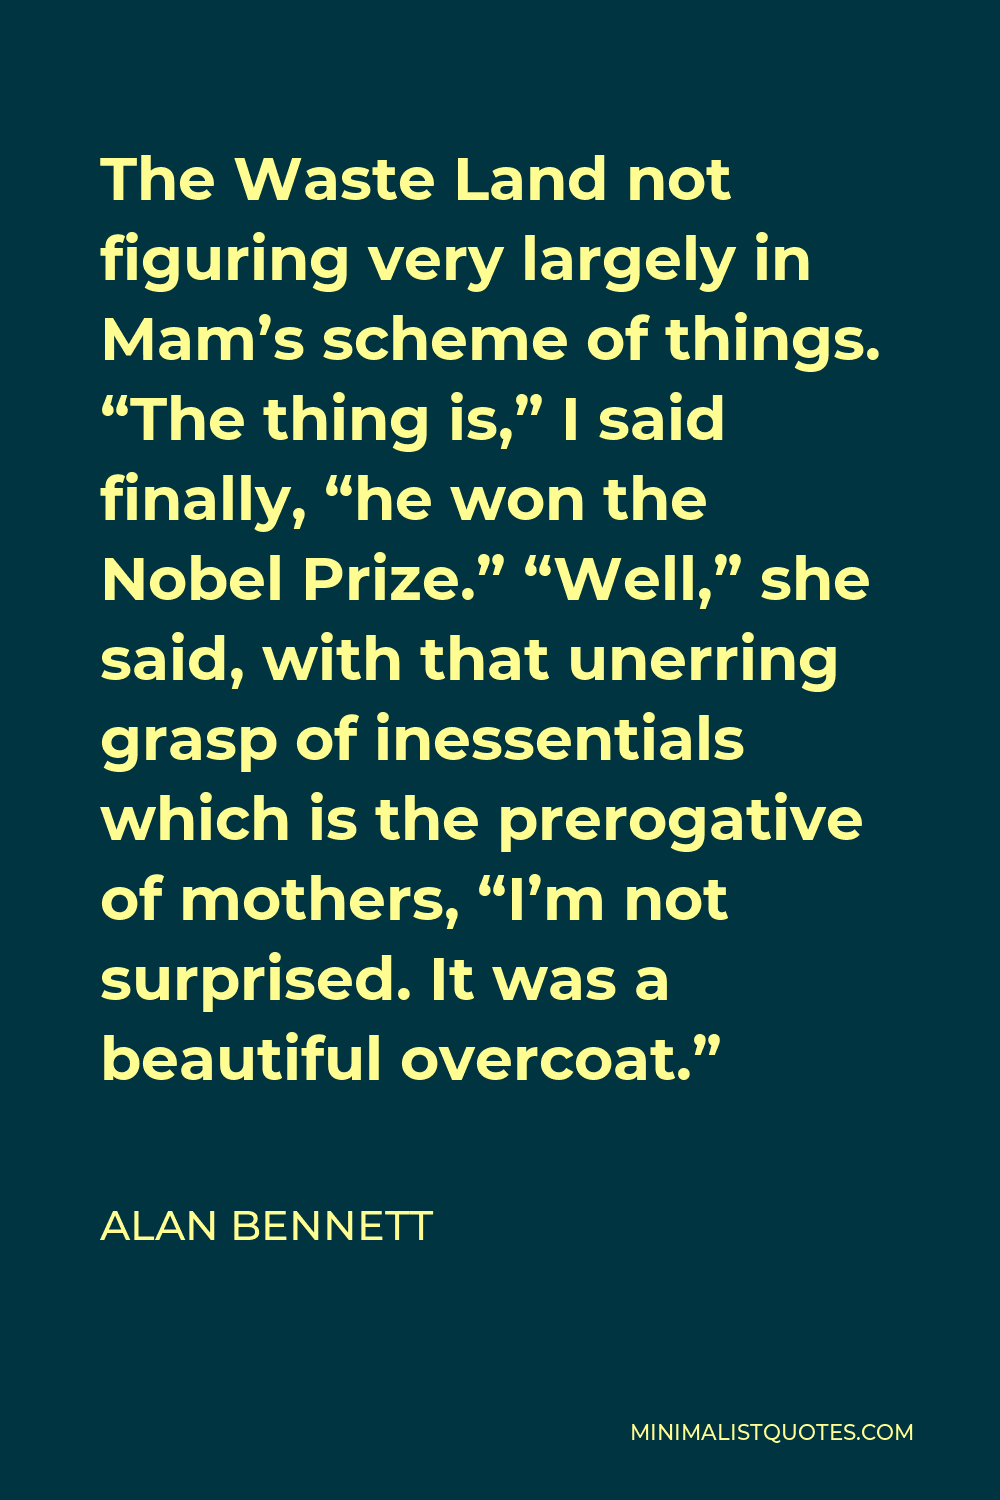 Alan Bennett Quote - The Waste Land not figuring very largely in Mam’s scheme of things. “The thing is,” I said finally, “he won the Nobel Prize.” “Well,” she said, with that unerring grasp of inessentials which is the prerogative of mothers, “I’m not surprised. It was a beautiful overcoat.”